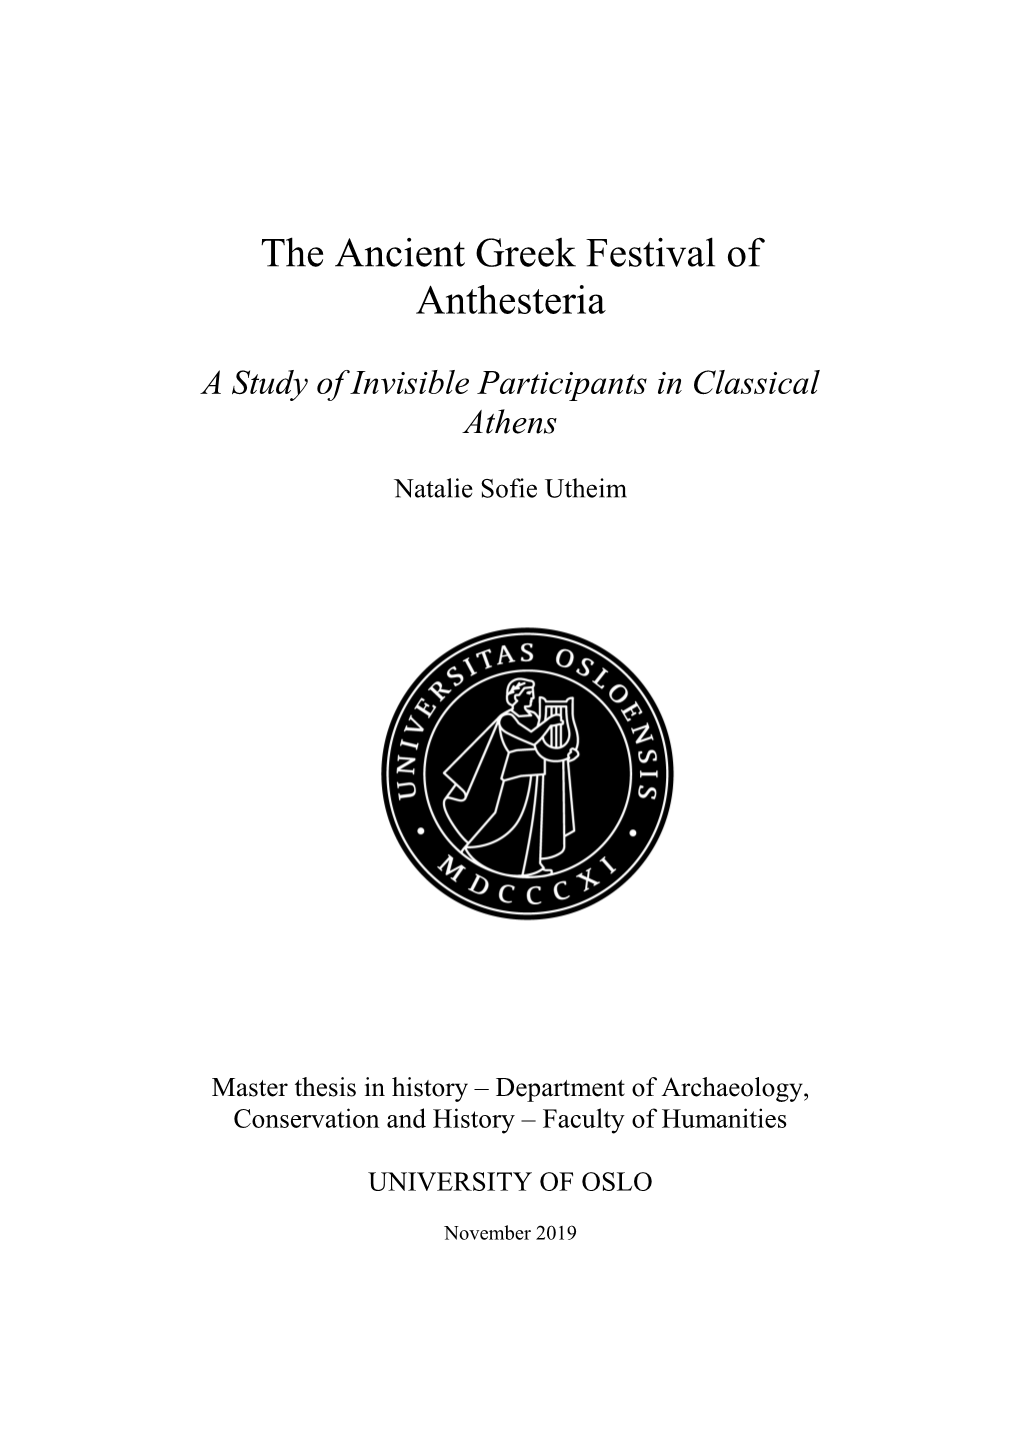 The Ancient Greek Festival of Anthesteria